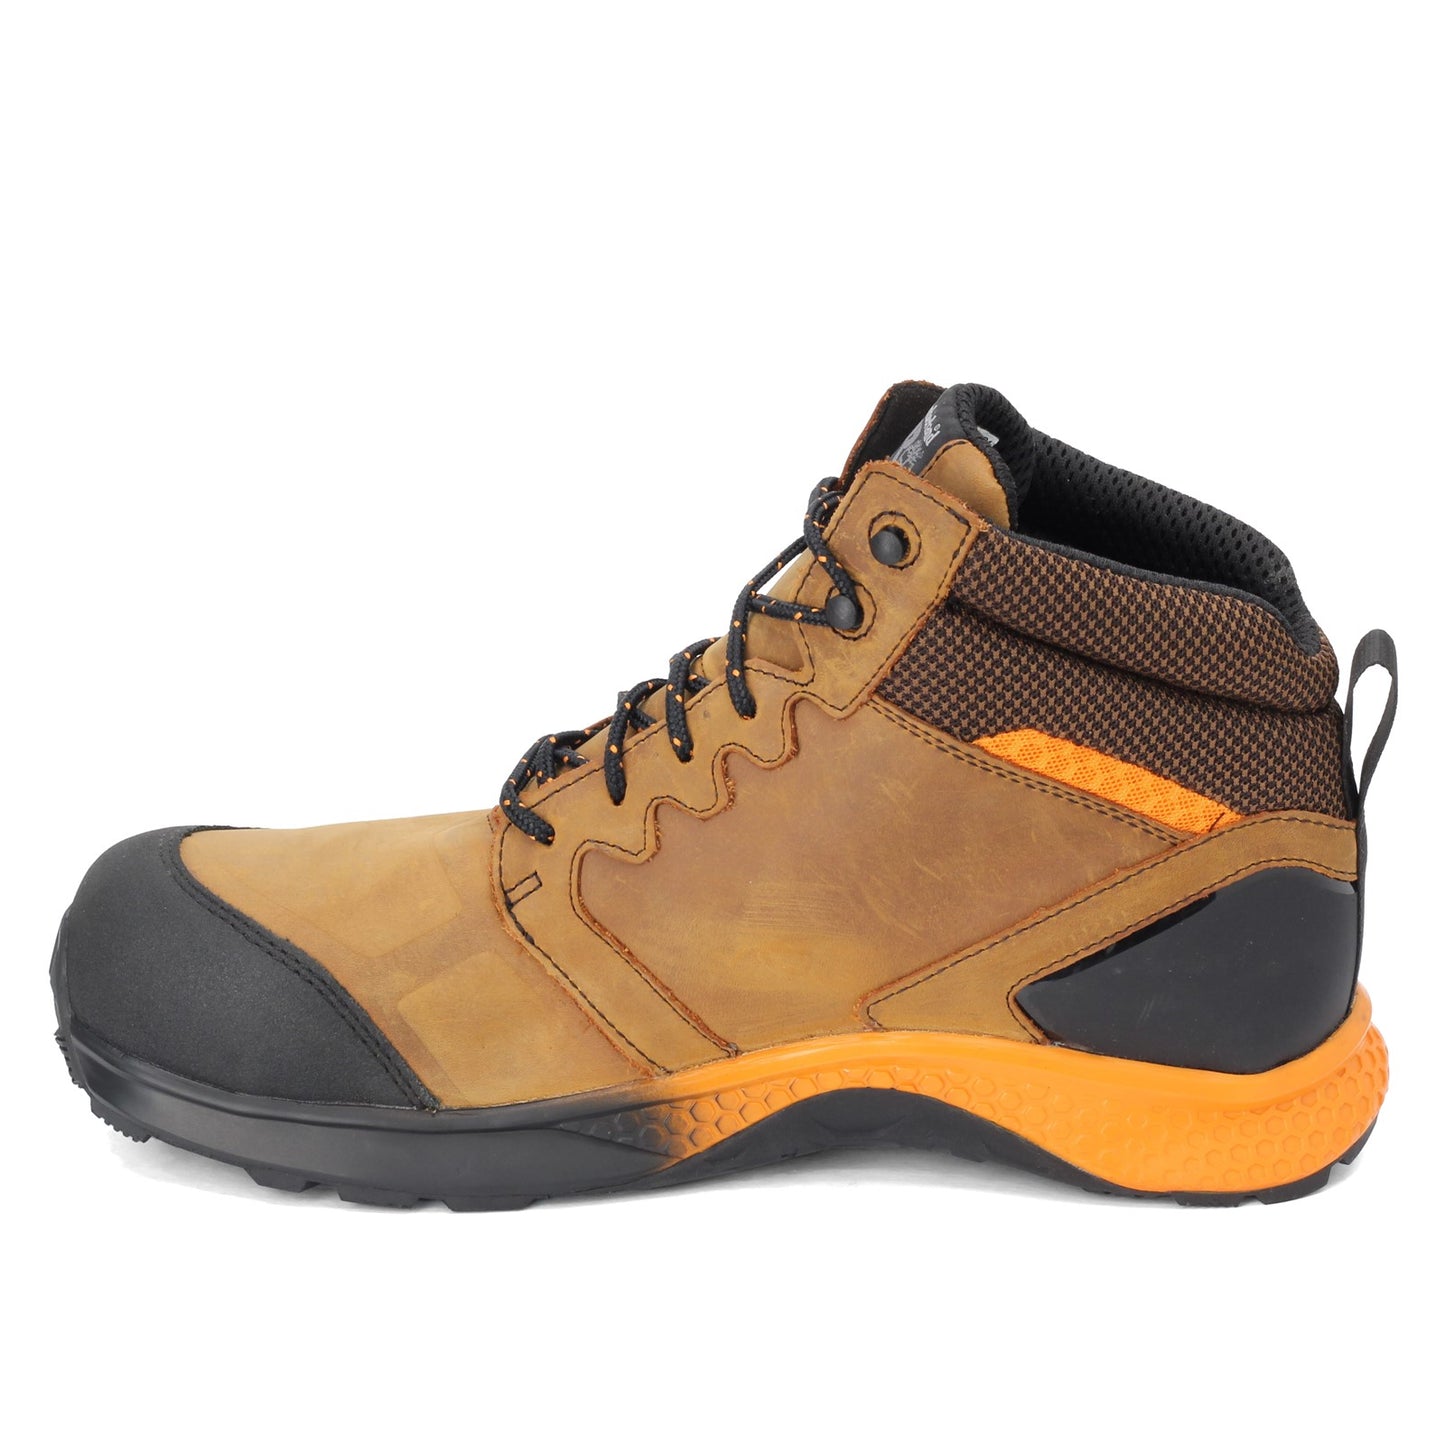 Peltz Shoes  Men's Timberland Pro Reaxion Mid Comp Toe Work Boot BROWN ORANGE TB0A1ZR1214